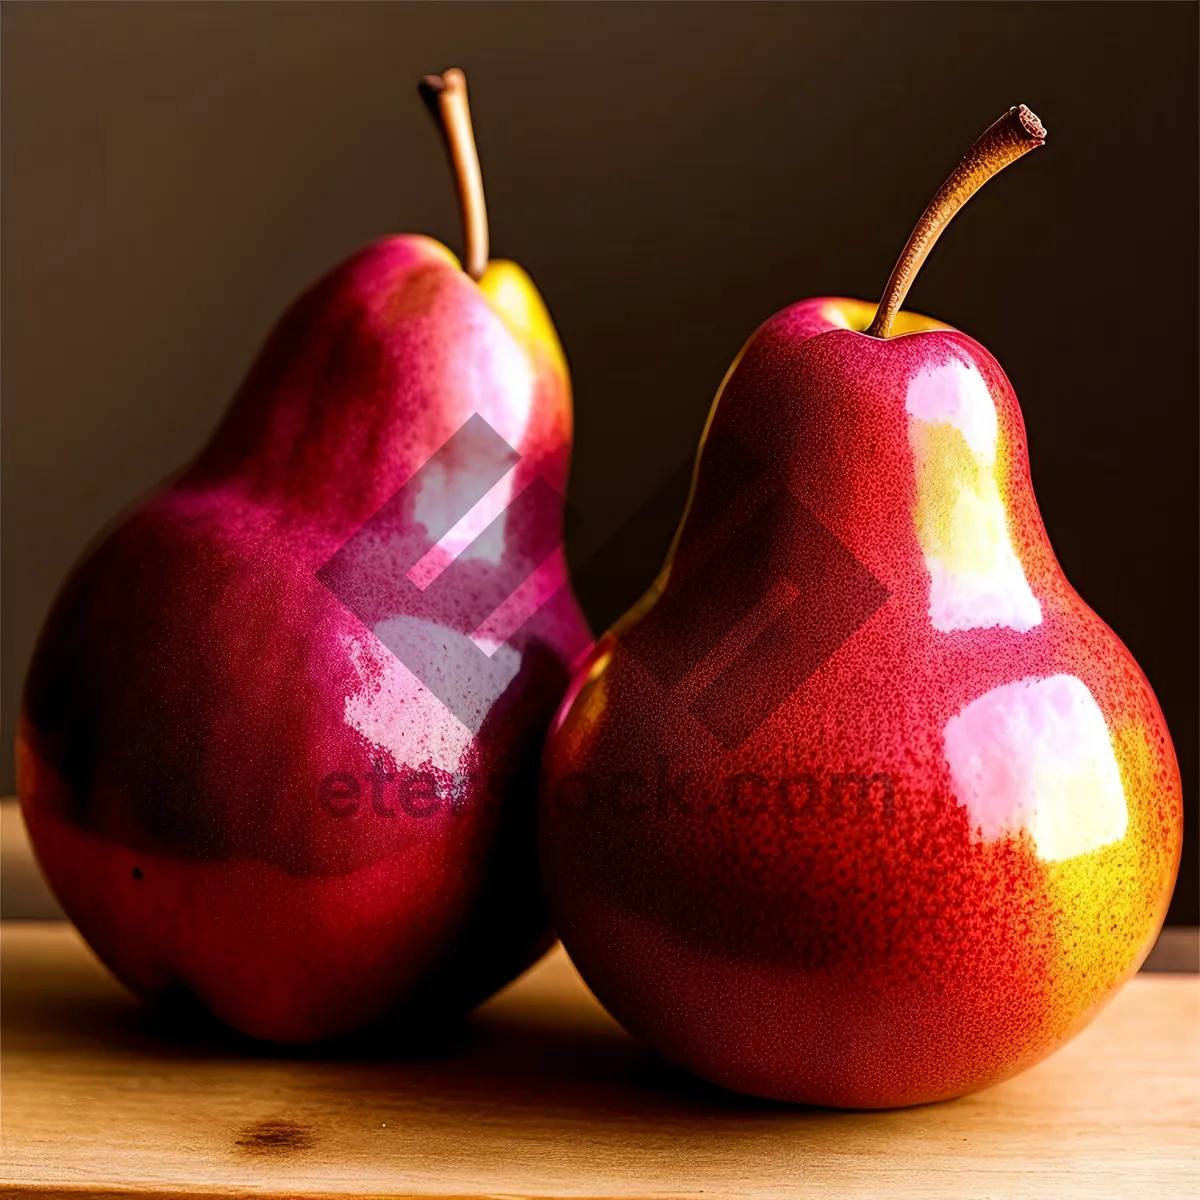 Picture of Juicy Fresh Apples, Ripe and Delicious - Nutritious Food